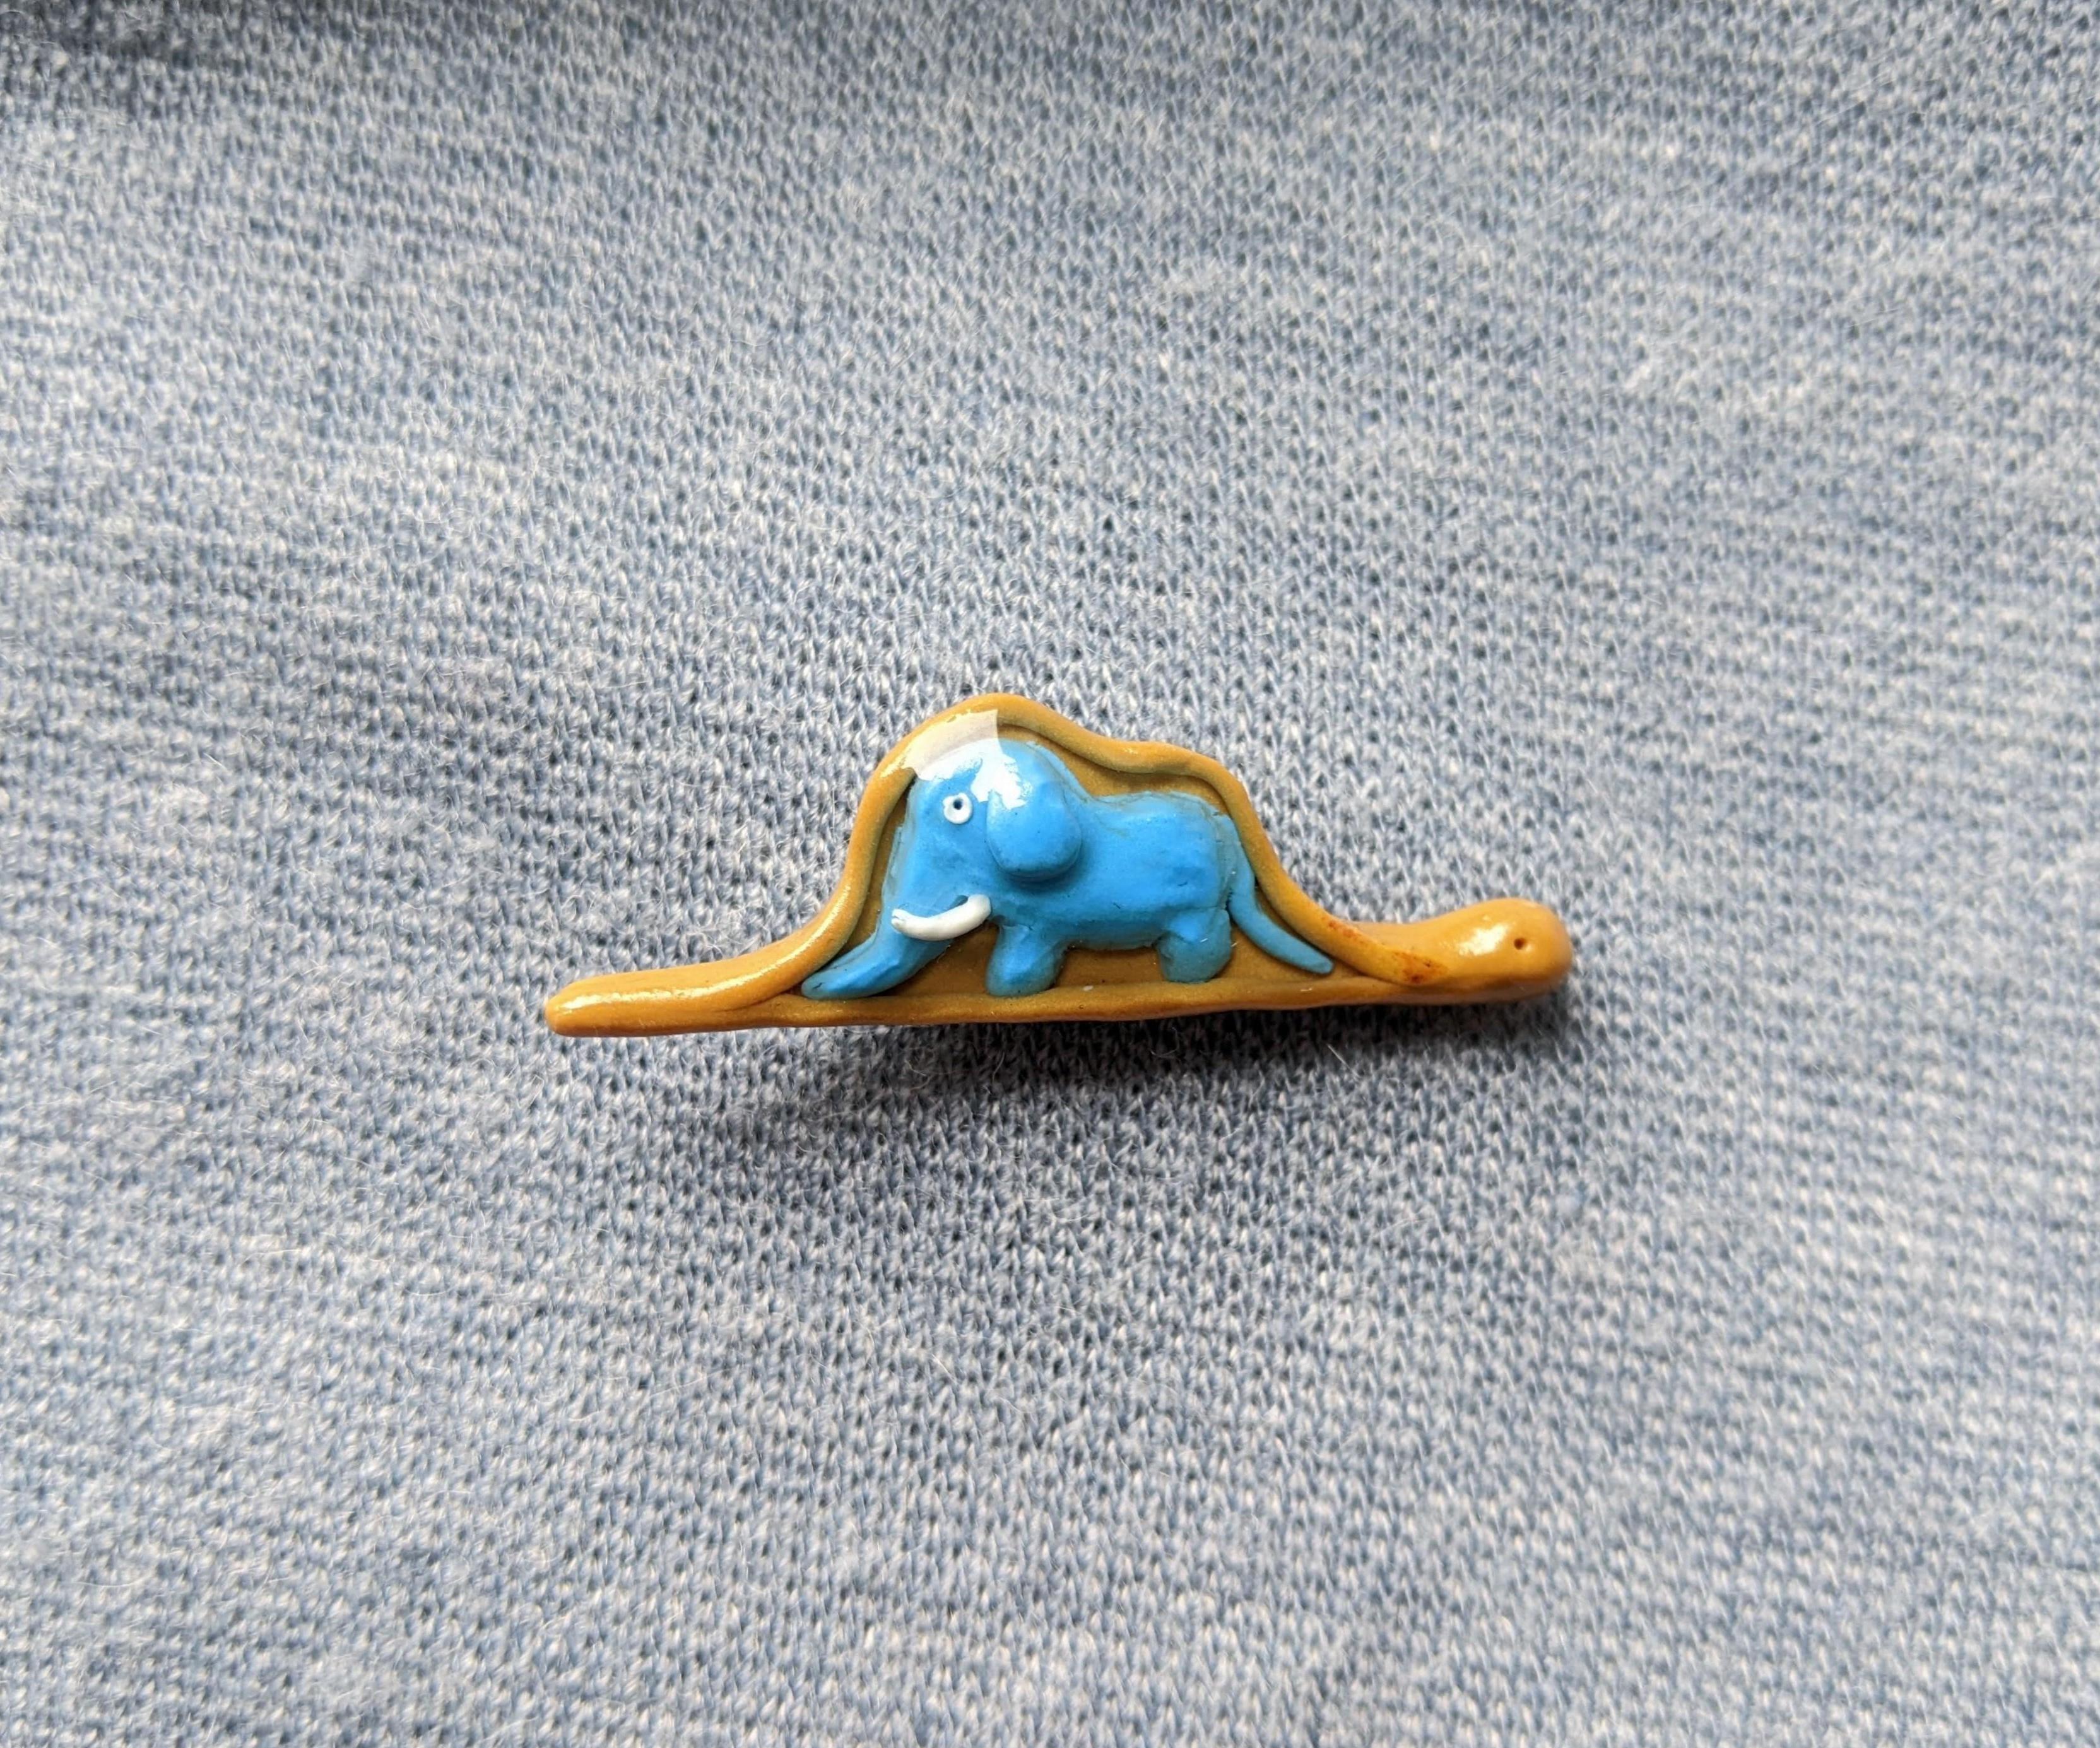 The Little Prince Inspired Pin